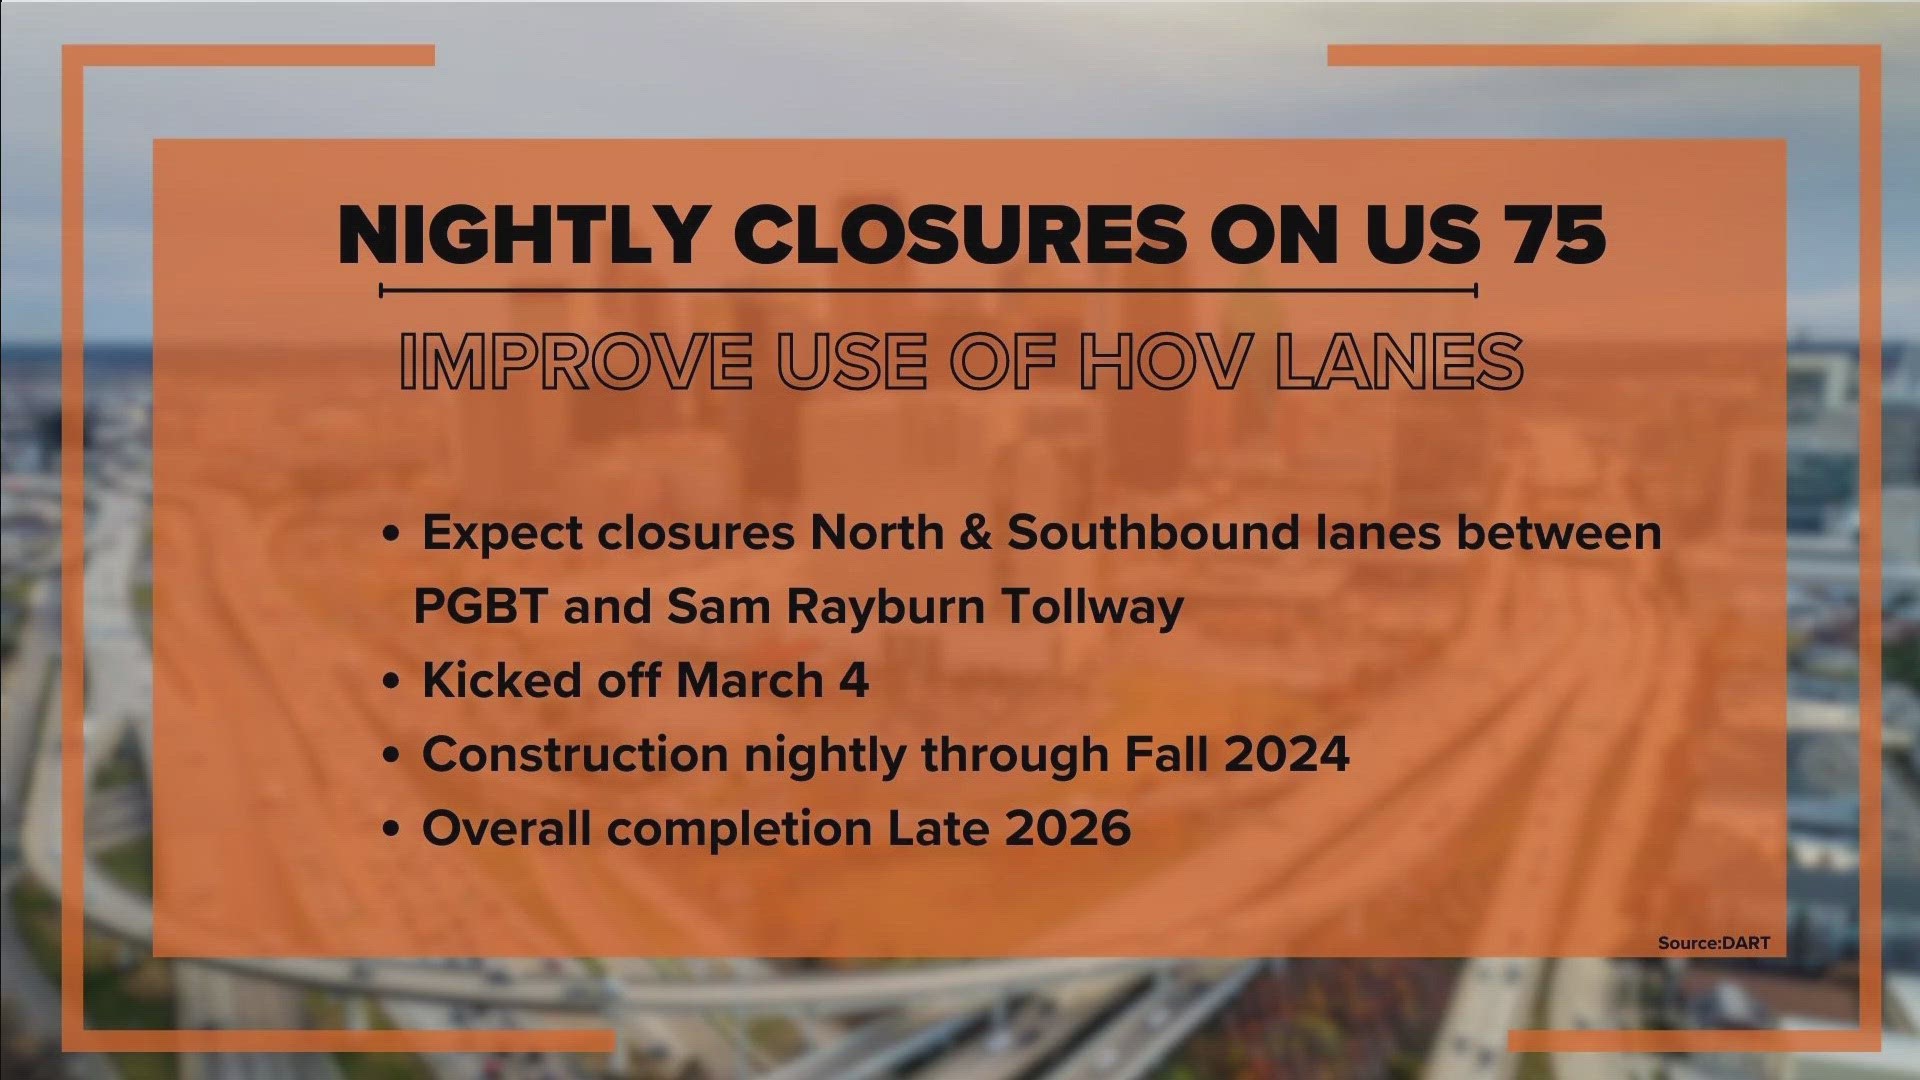 Closures will happen on weeknights through Fall 2024.